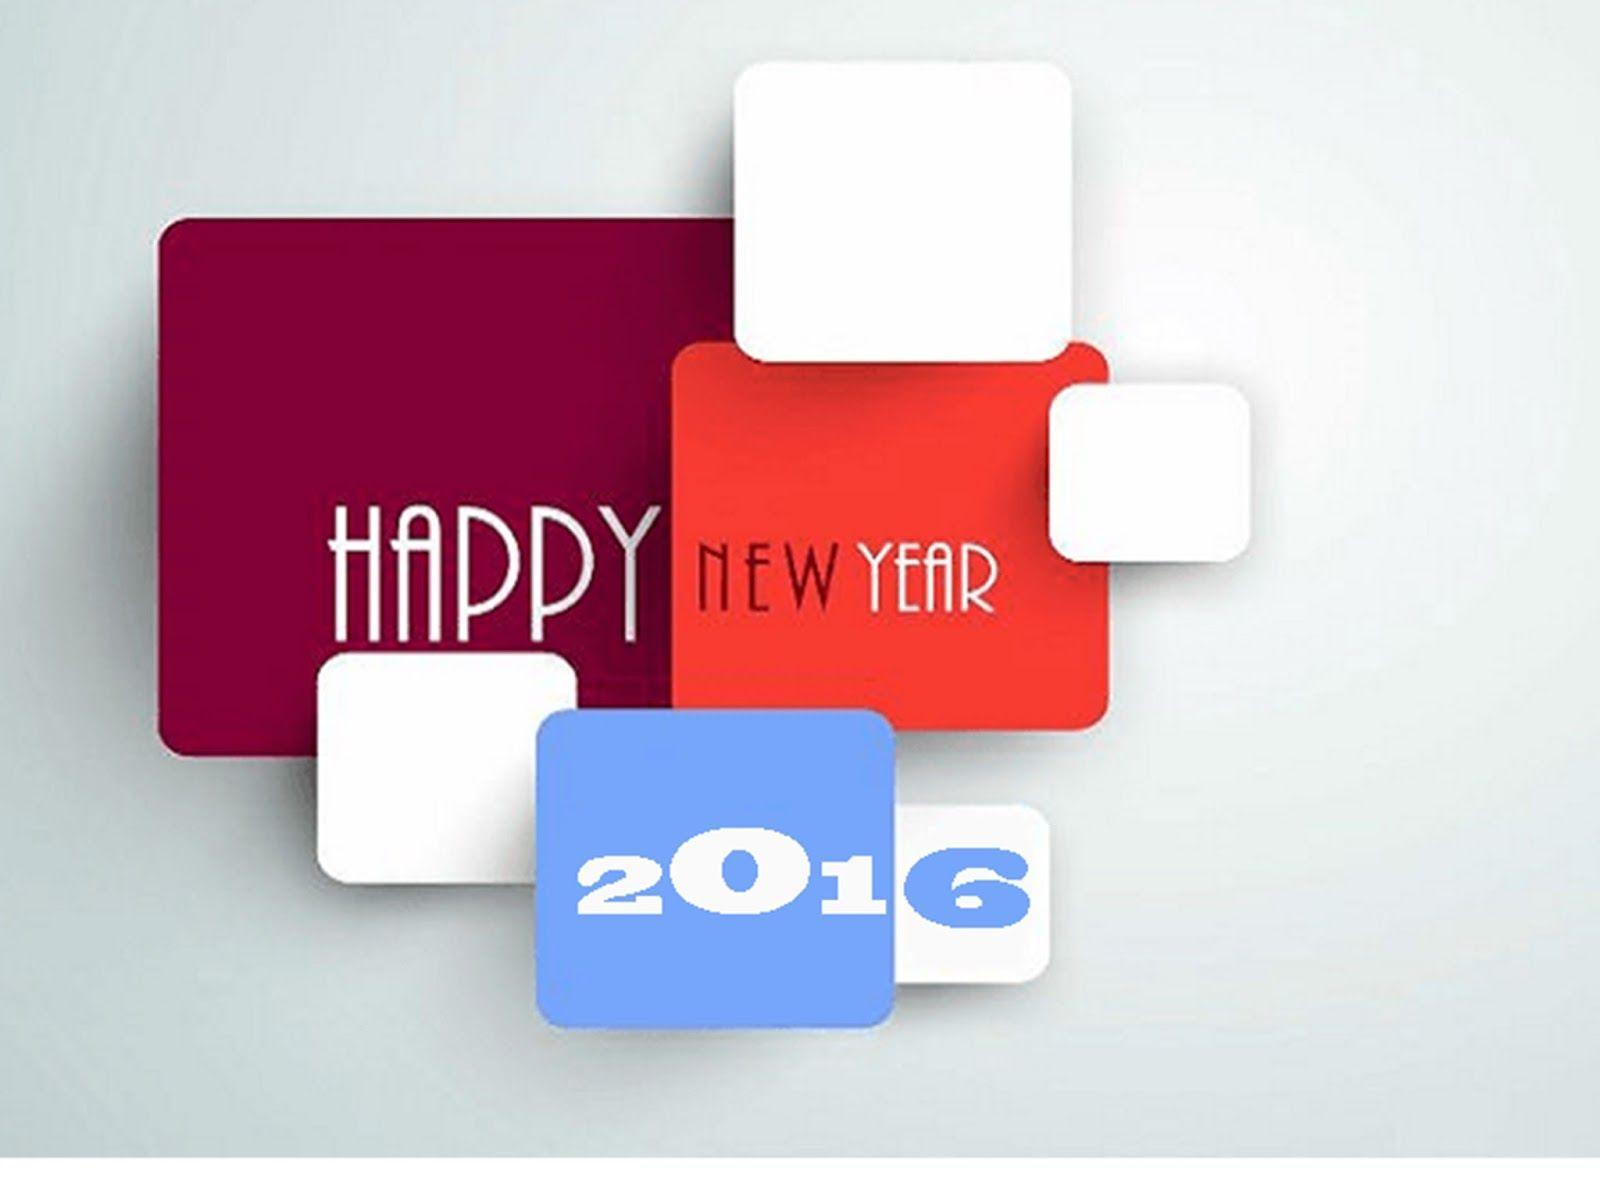 Happy New Year Greeting Cards 2016. Happy New Year 2016